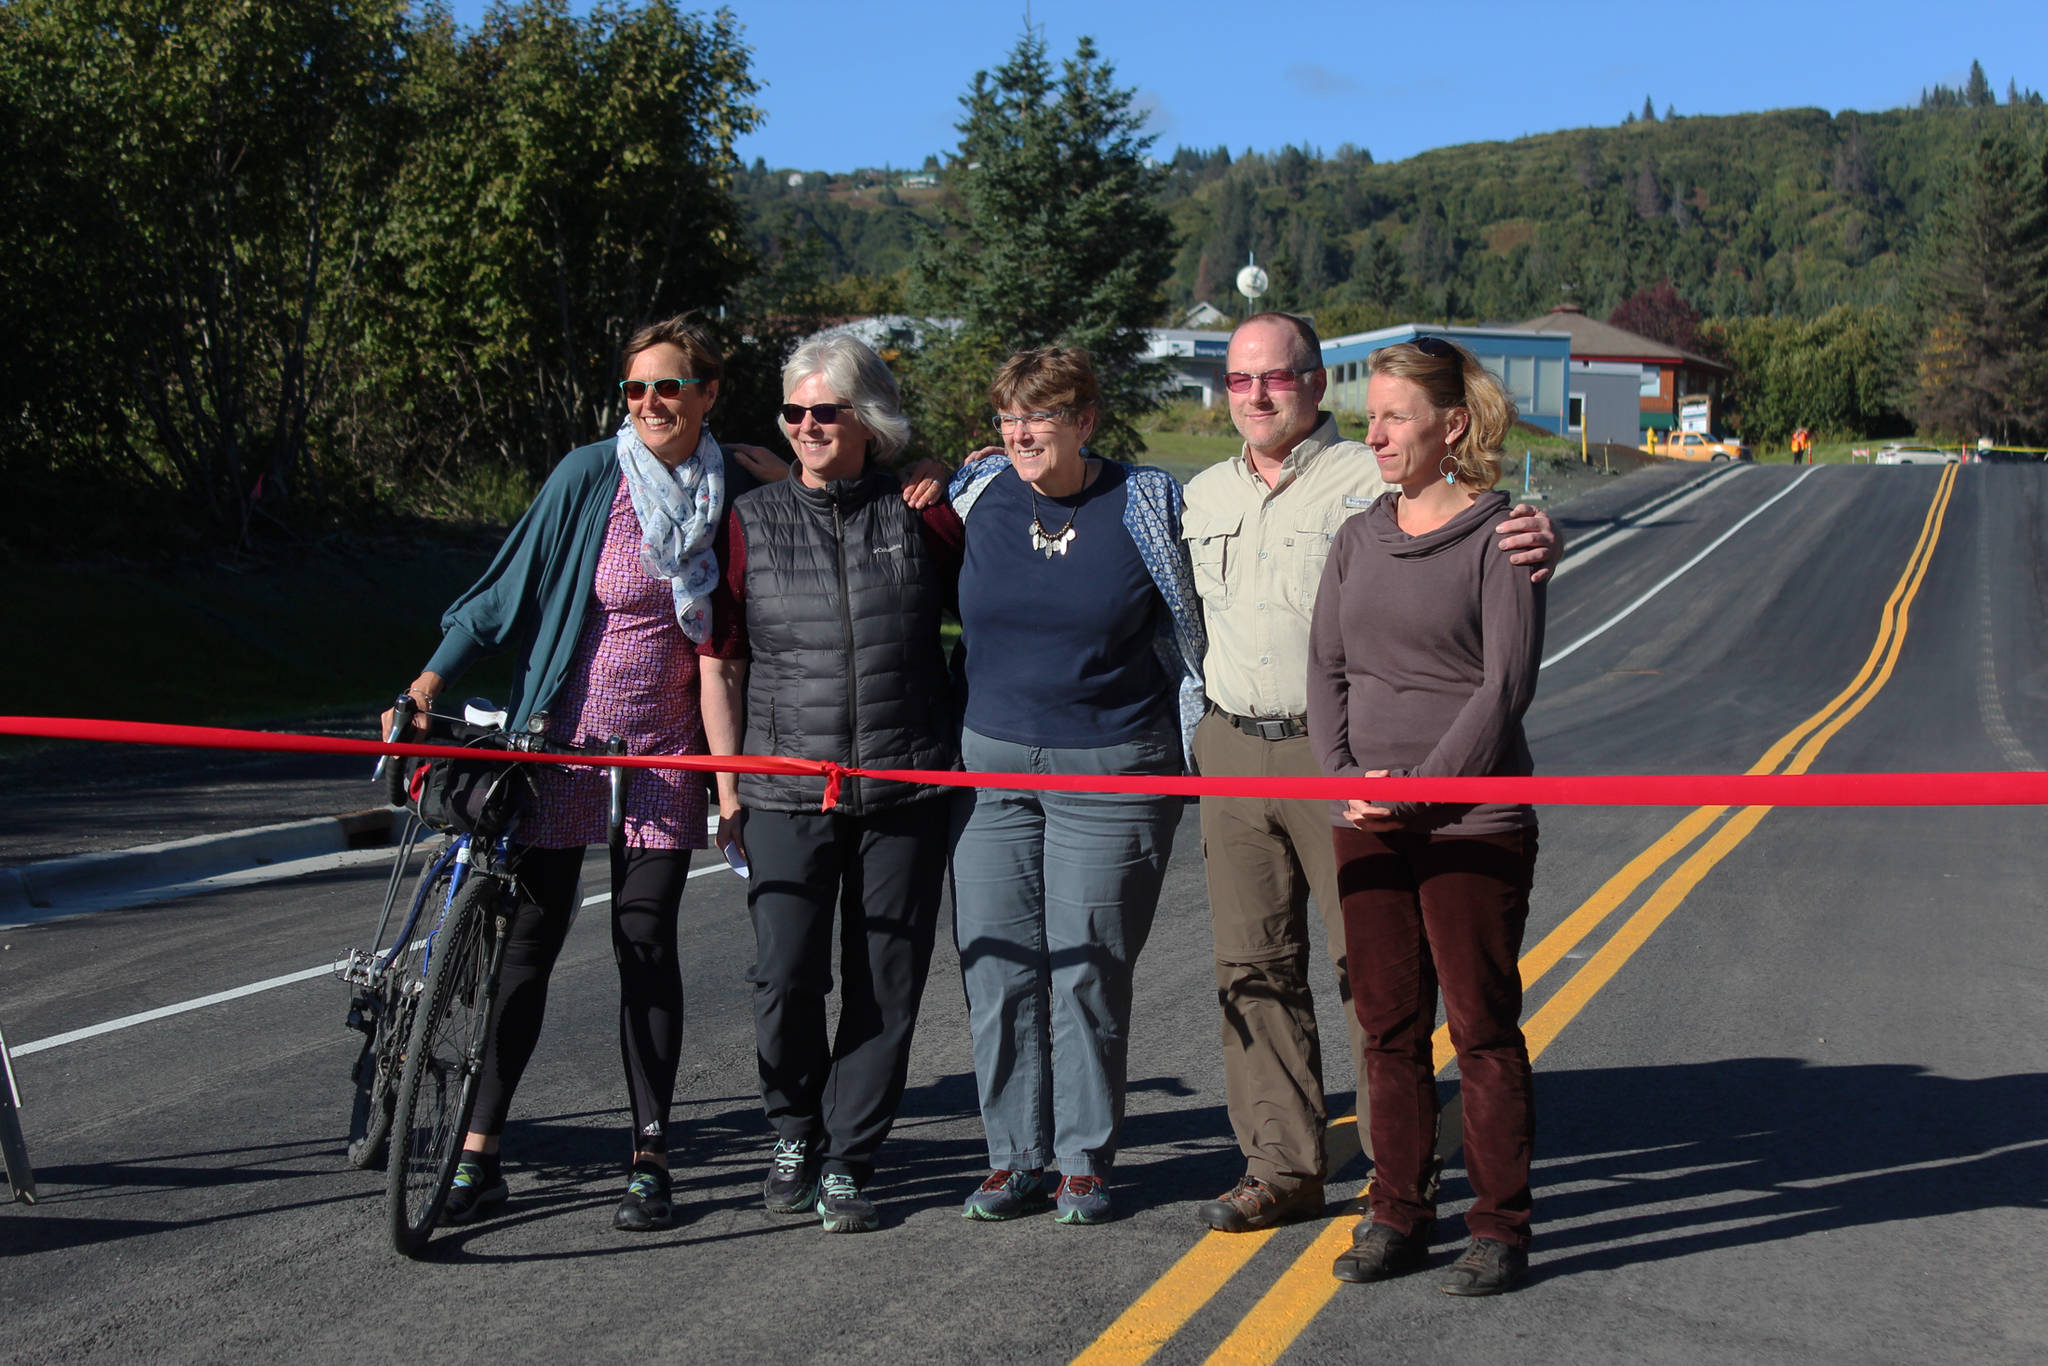 Five of the six Homer City Council members (from left to right: Donna Aderhold, Shelly Erickson, Caroline Venuti, Heath Smith and Rachel Lord) smile at the grand opening for the extended Greatland Street on Tuesday, Sept. 25, 2018 in Homer, Alaska. (Photo by Megan Pacer/Homer News)